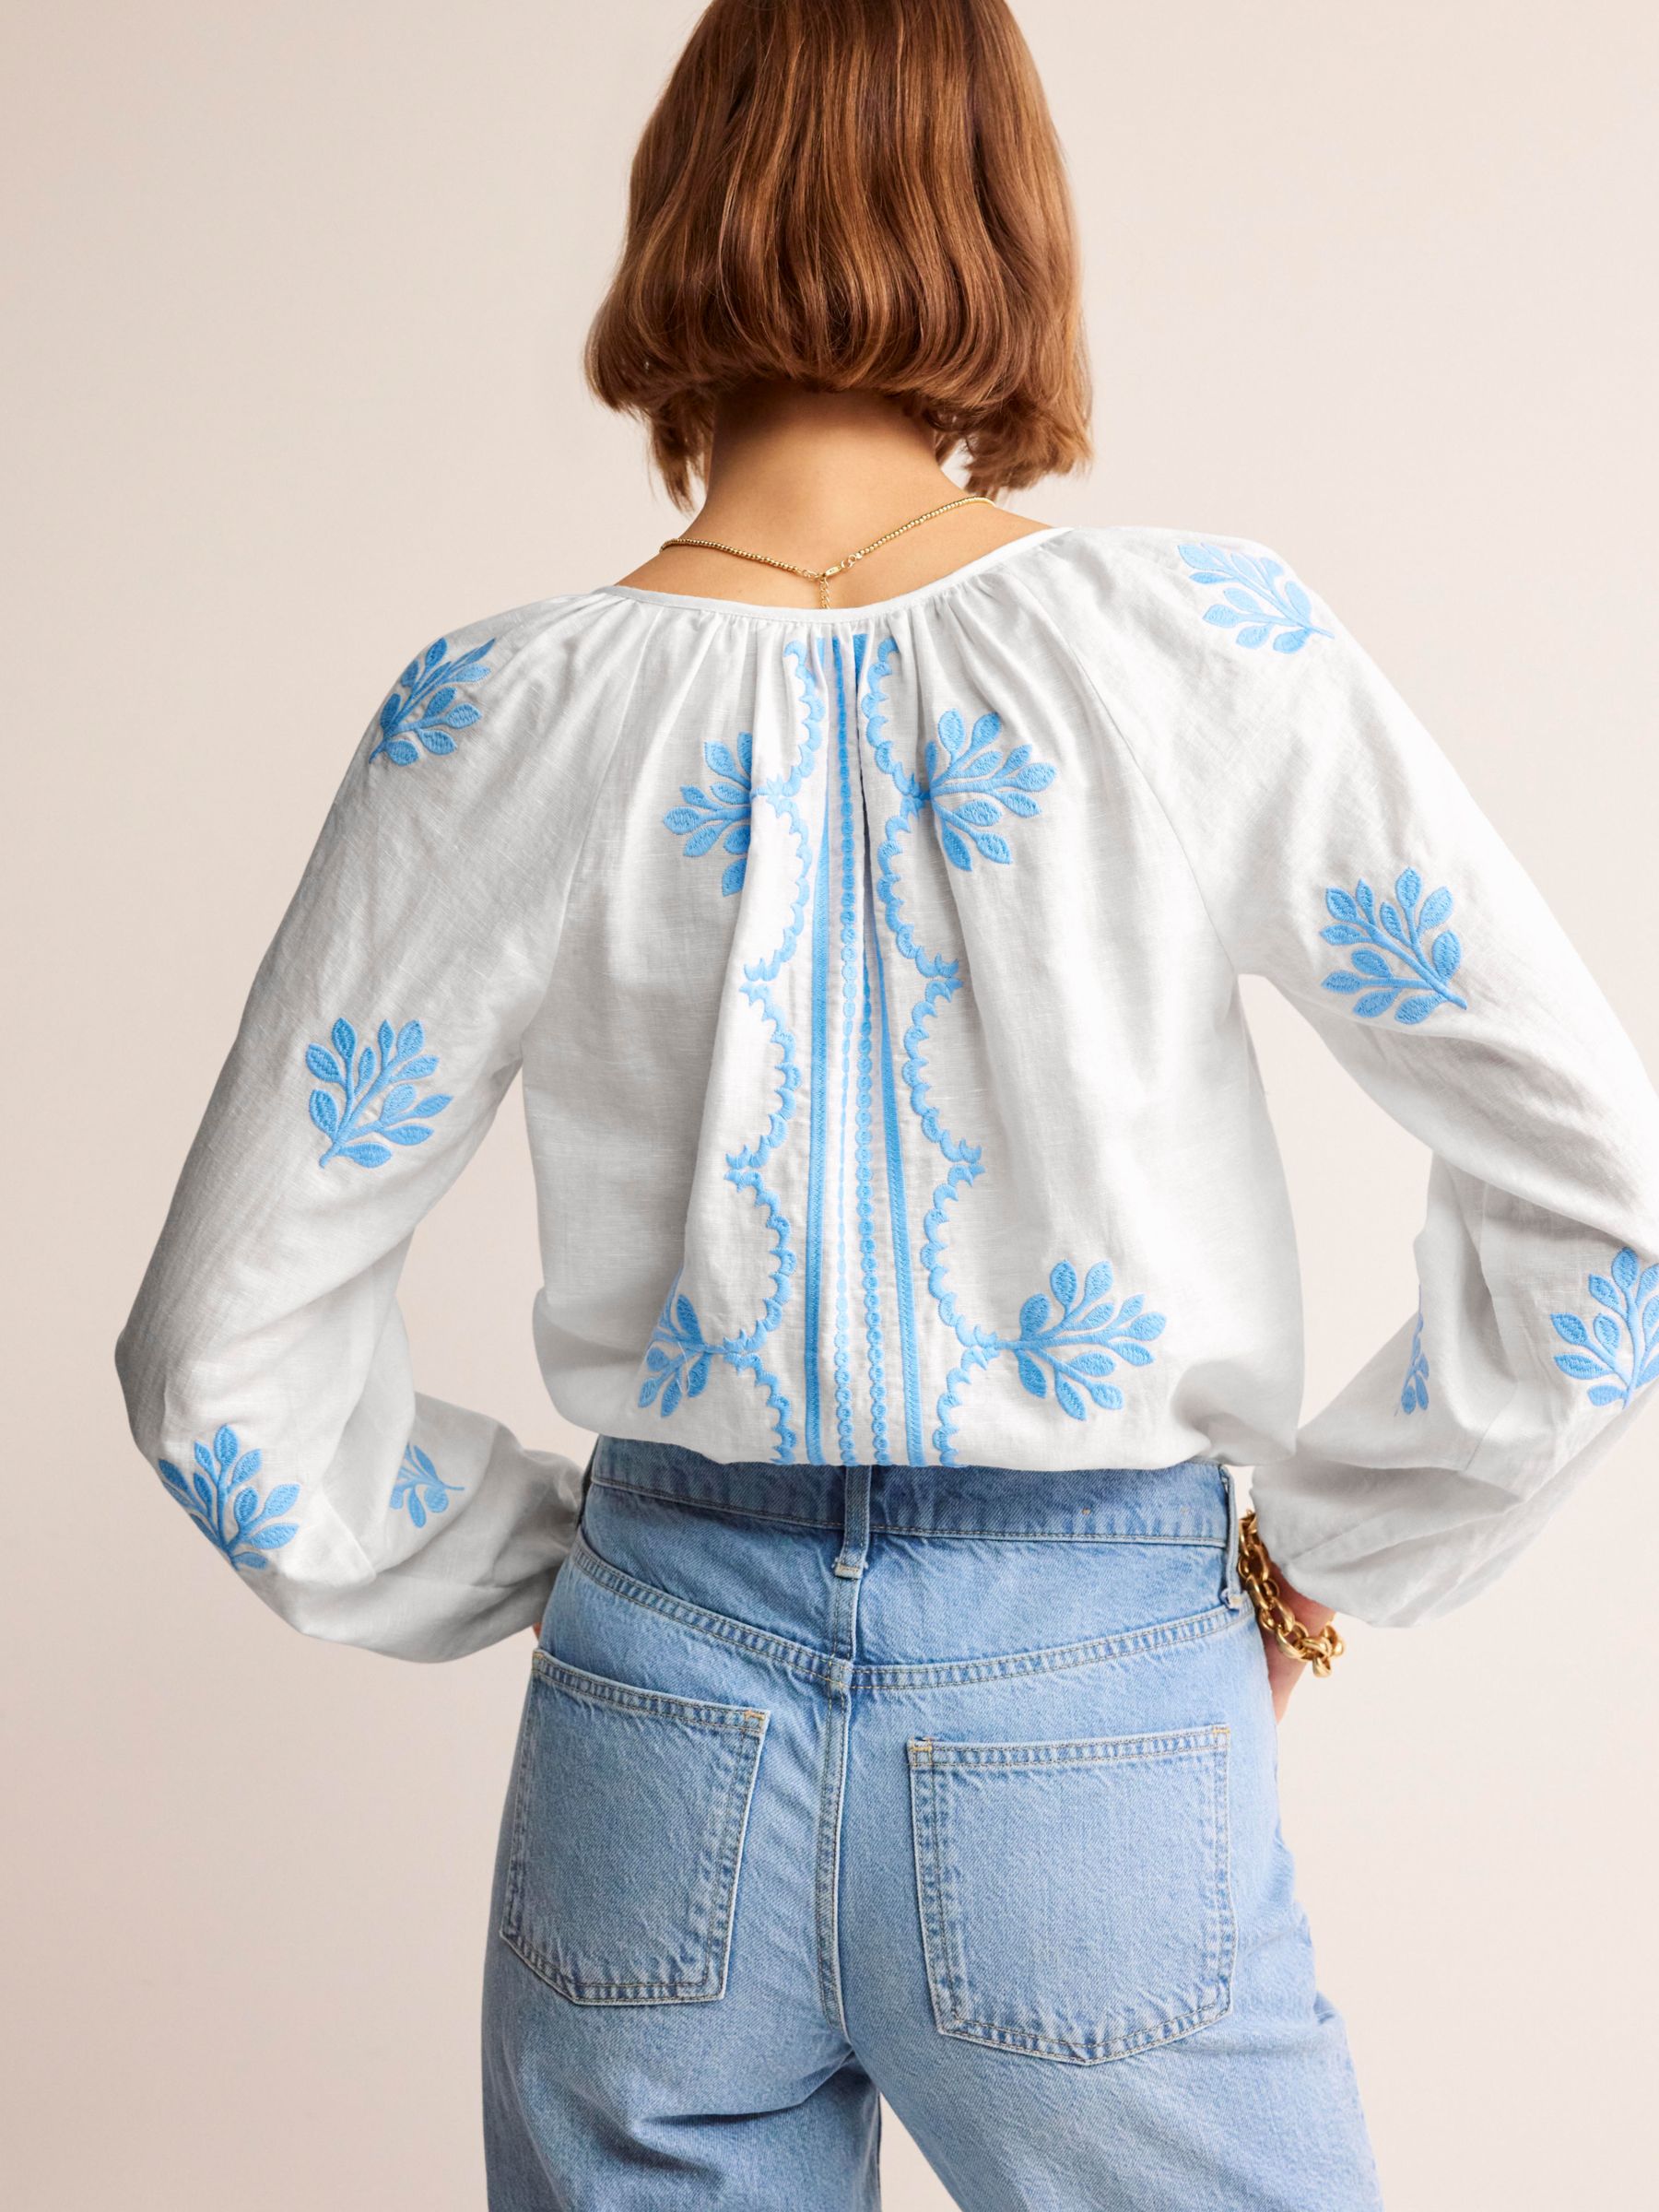 Buy Boden Serena Embroidered Blouse, White/Blue Online at johnlewis.com